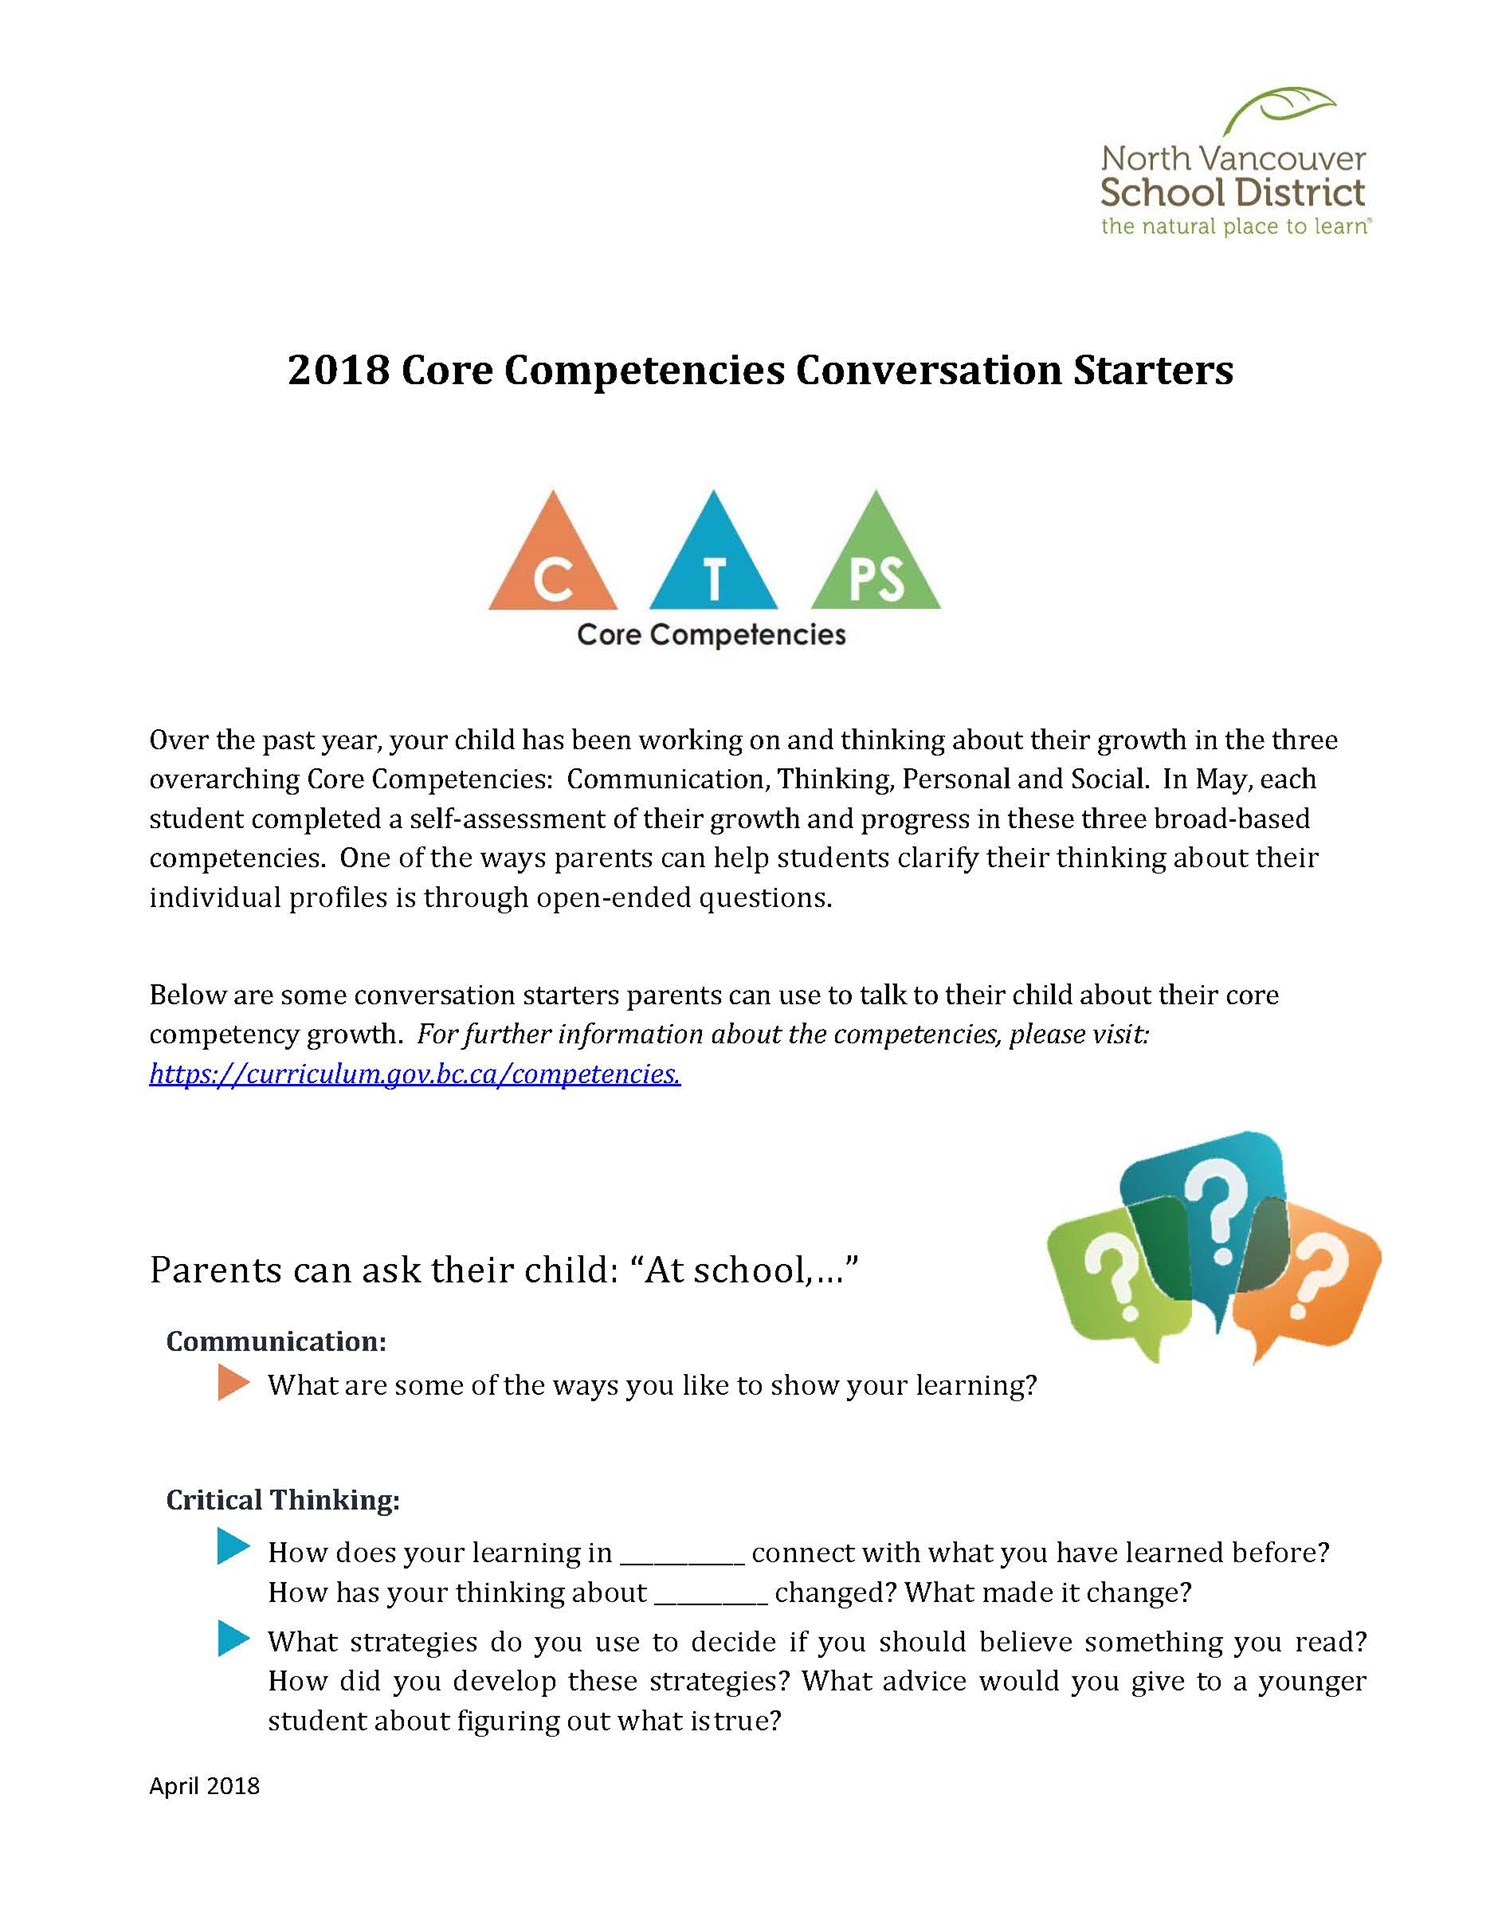 2018 Core Competency Self Assessment Conversation Starters_Page_1.jpg